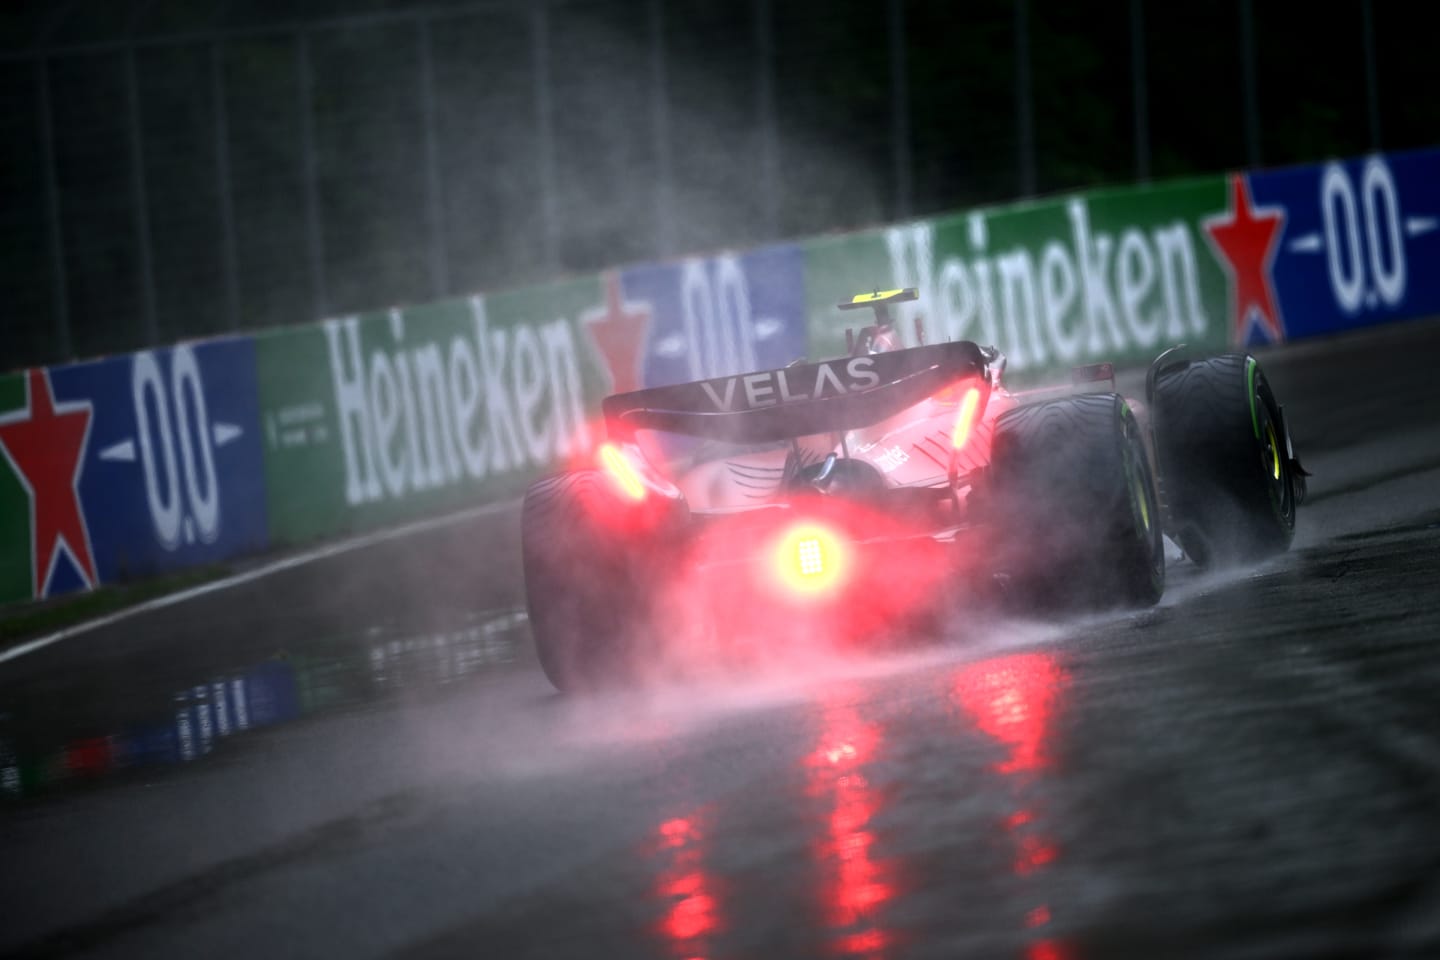 MONTREAL, QUEBEC - JUNE 18: Carlos Sainz of Spain driving (55) the Ferrari F1-75 in the wet during qualifying ahead of the F1 Grand Prix of Canada at Circuit Gilles Villeneuve on June 18, 2022 in Montreal, Quebec. (Photo by Clive Mason/Getty Images)